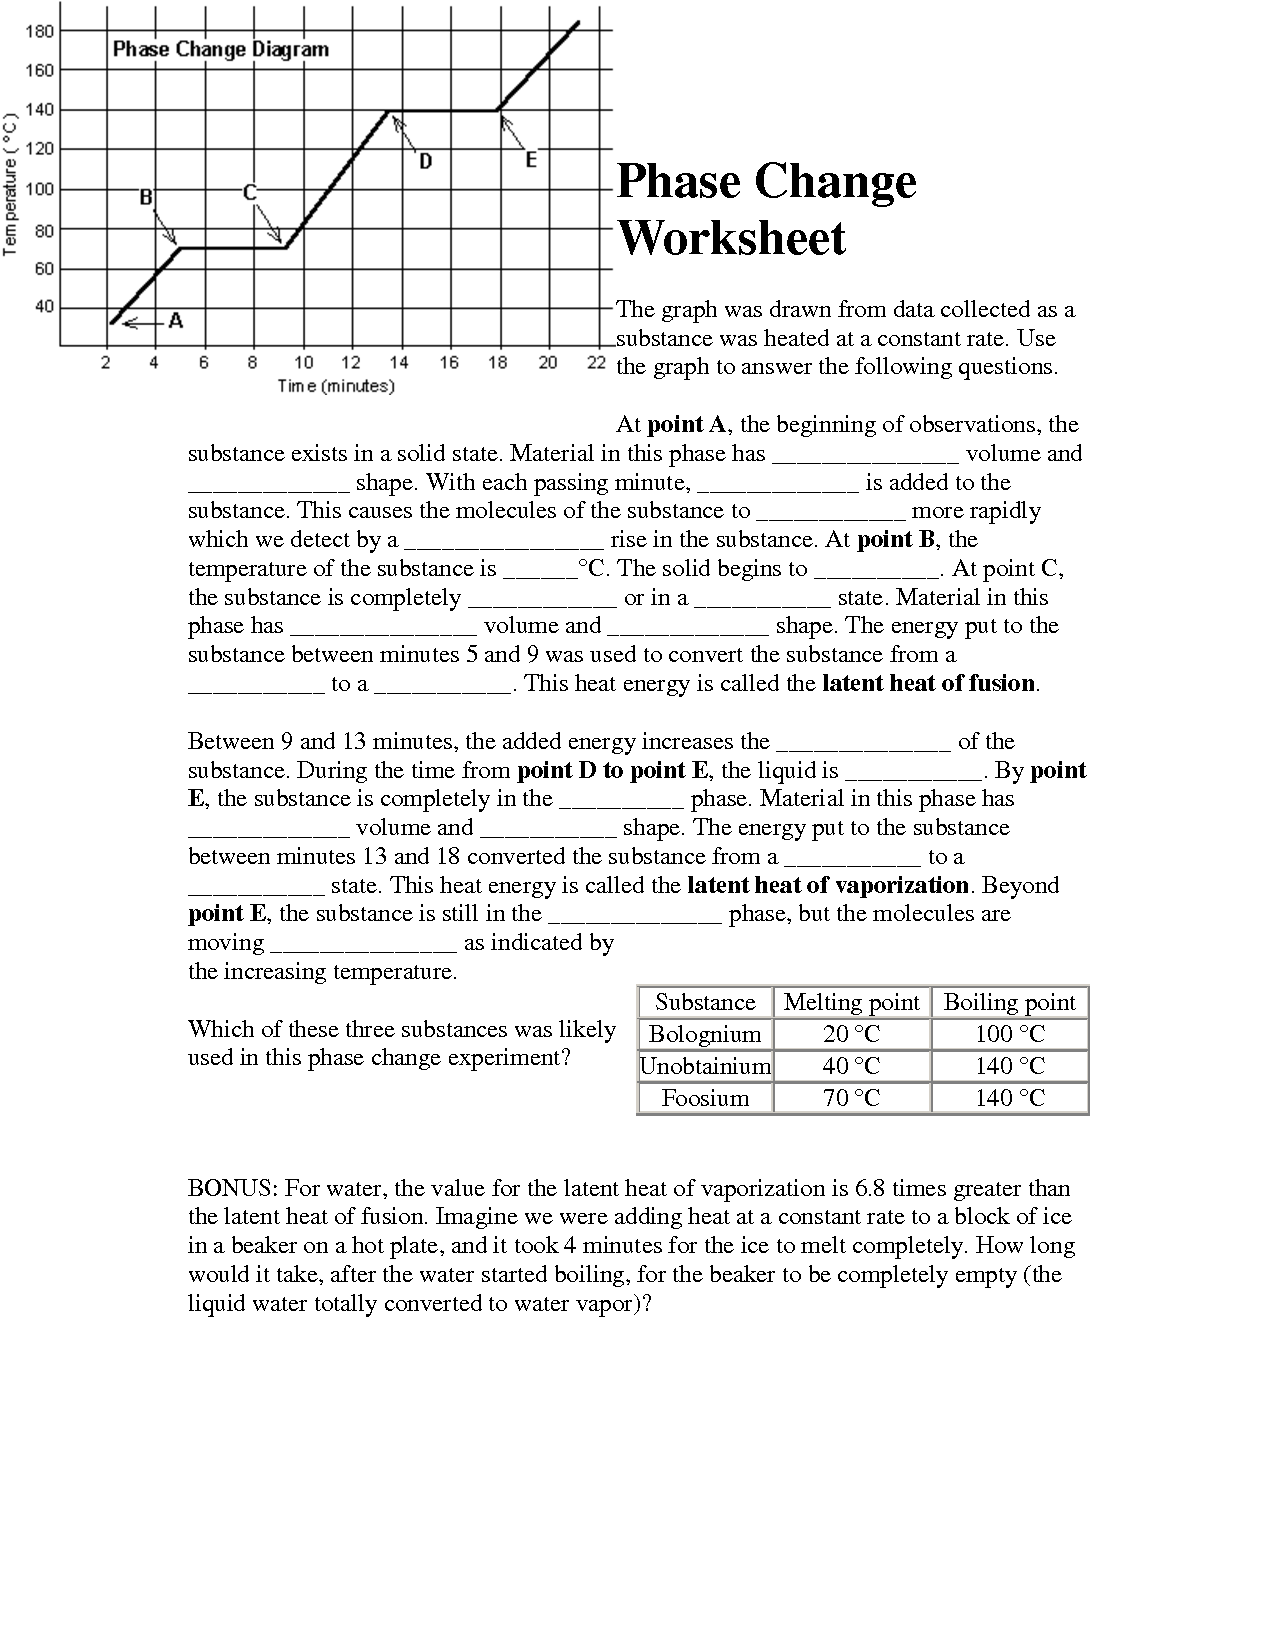 15 Best Images Of Phase Change Diagram Worksheet Answers